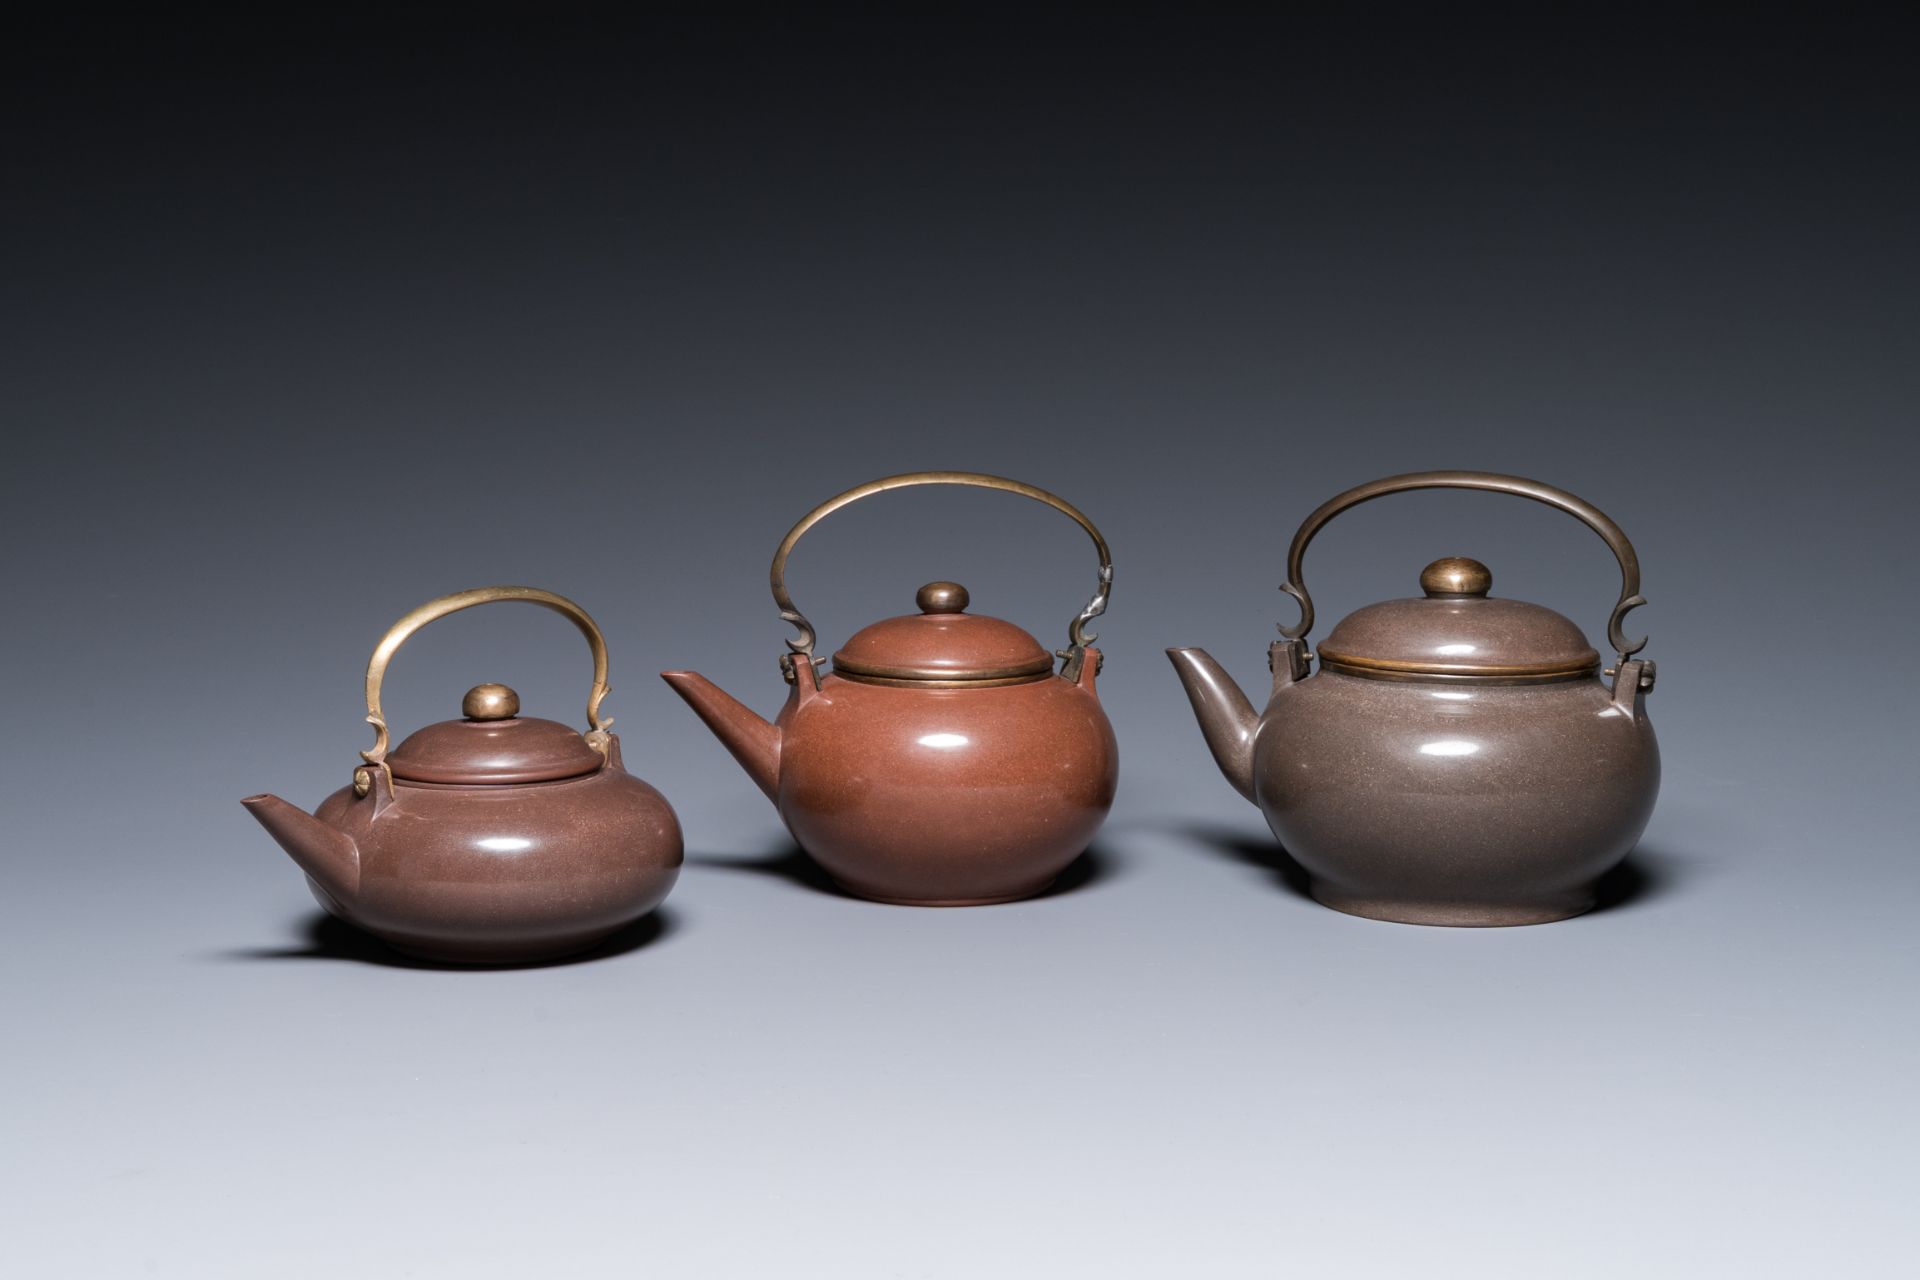 Three Chinese polished Yixing stoneware teapots and covers for the Thai market, Gong Ju è´¡å±€ mark,